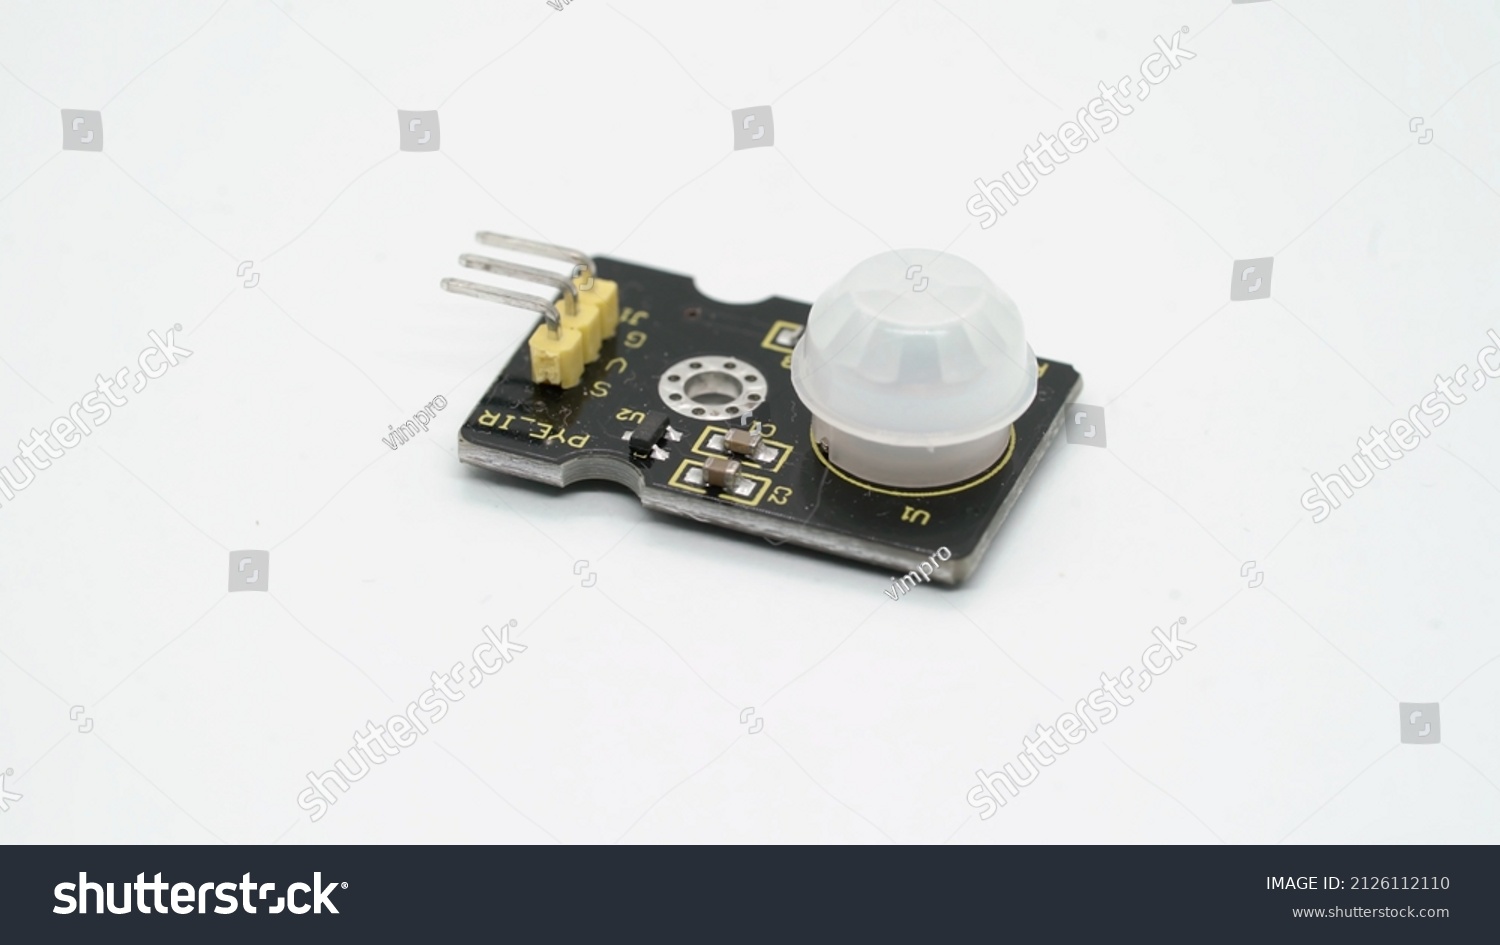 Arduino electronic component. Motion detector ir infrared sensor for security alarm at white isolated. Electronics diy robotics chip board. #2126112110